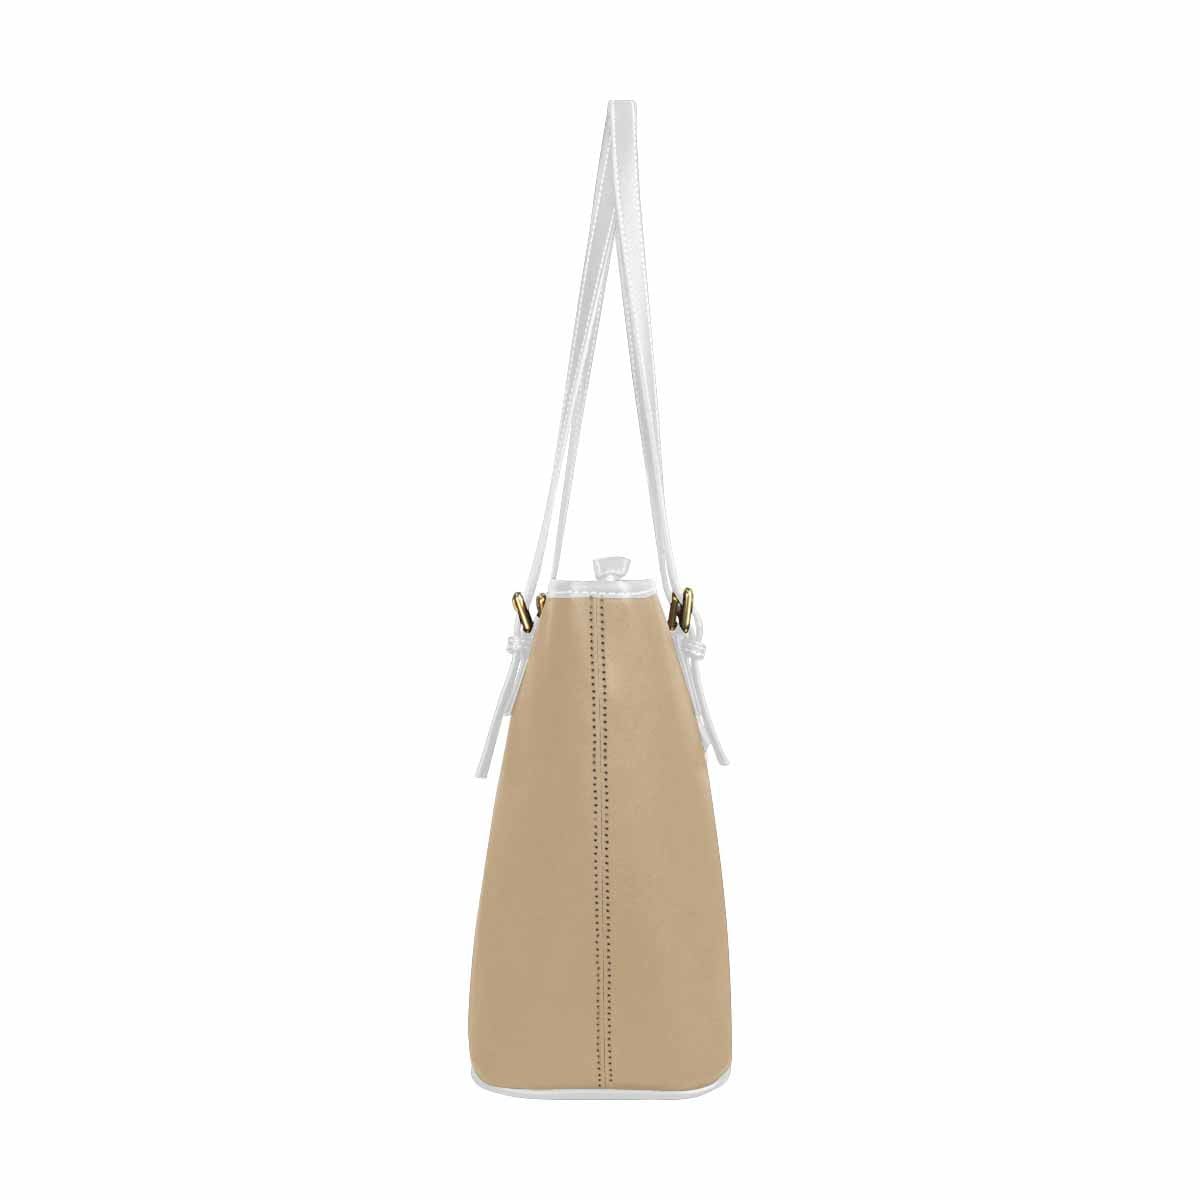 Tan Brown - Large Leather Tote Bag with Zipper by inQue.Style